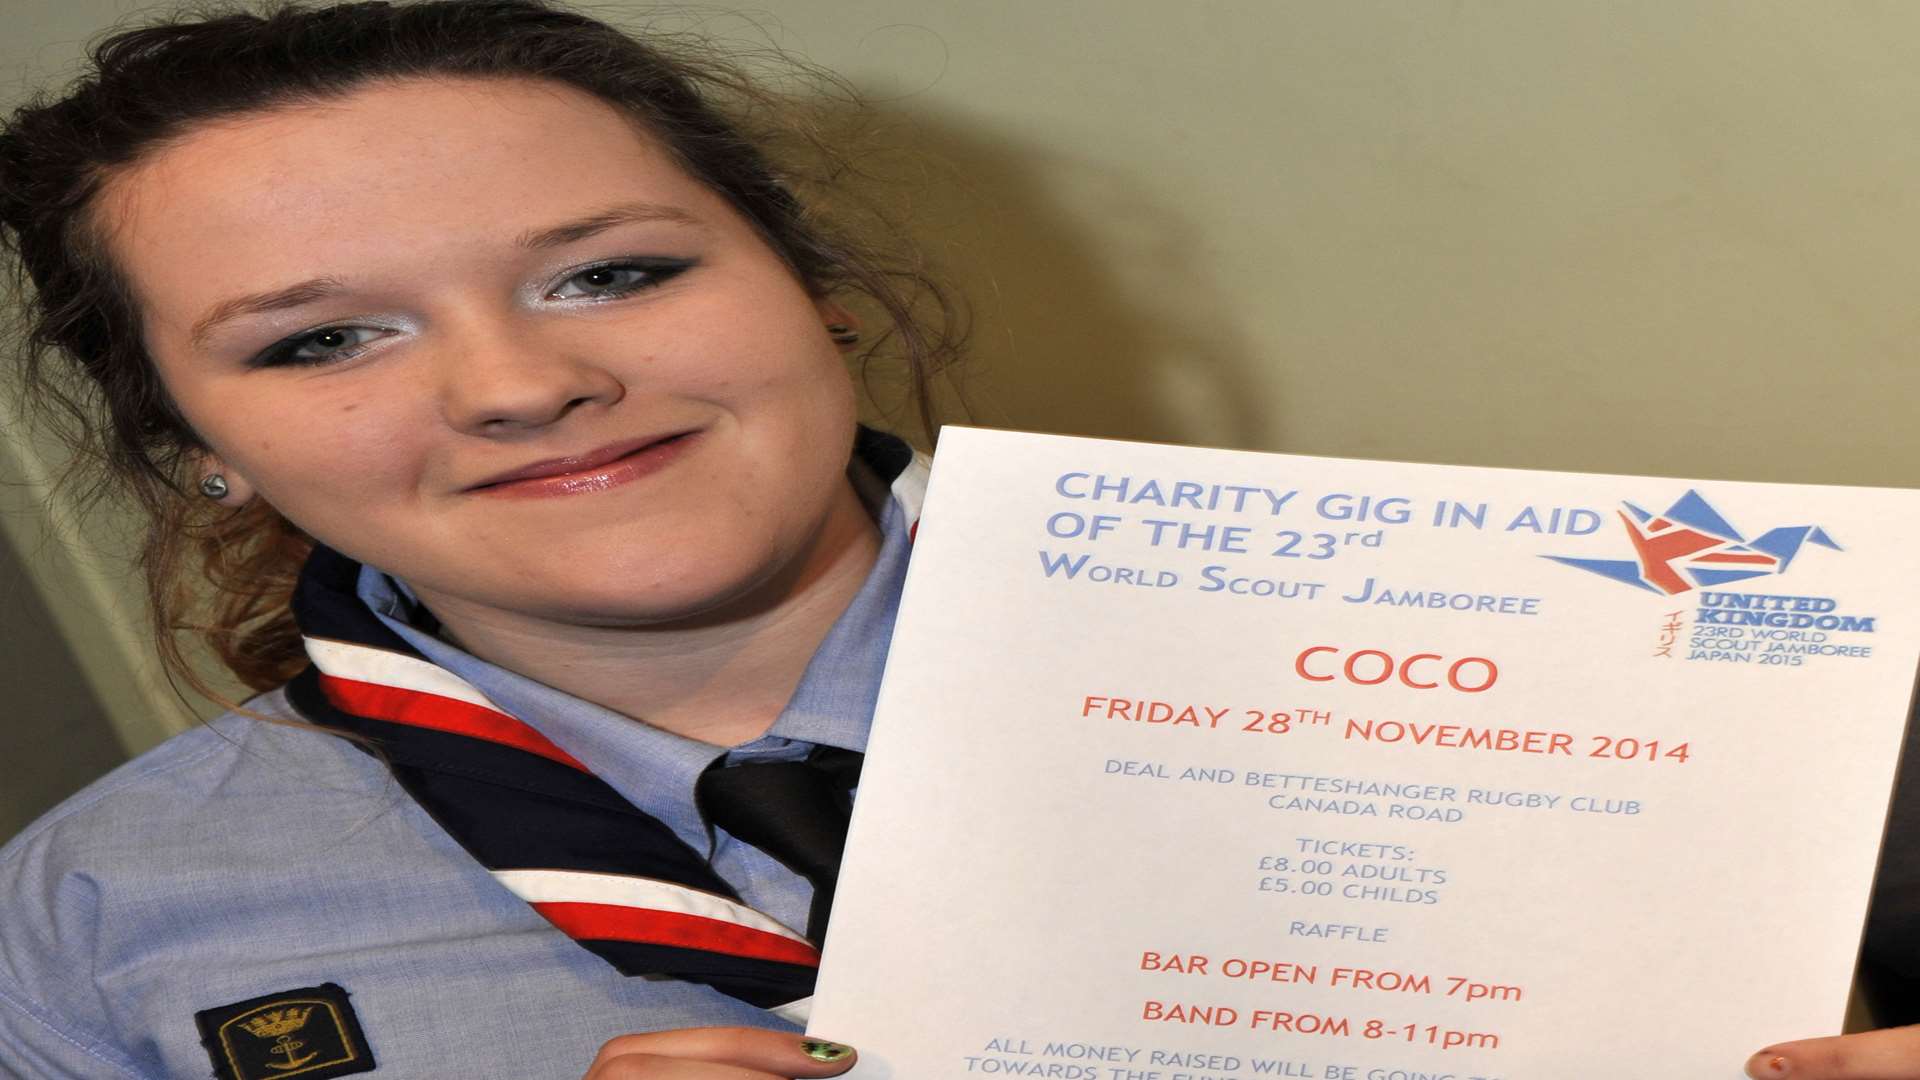 Abi Stockhall is fundraising so she can attend the 2015 jamoree in Japan